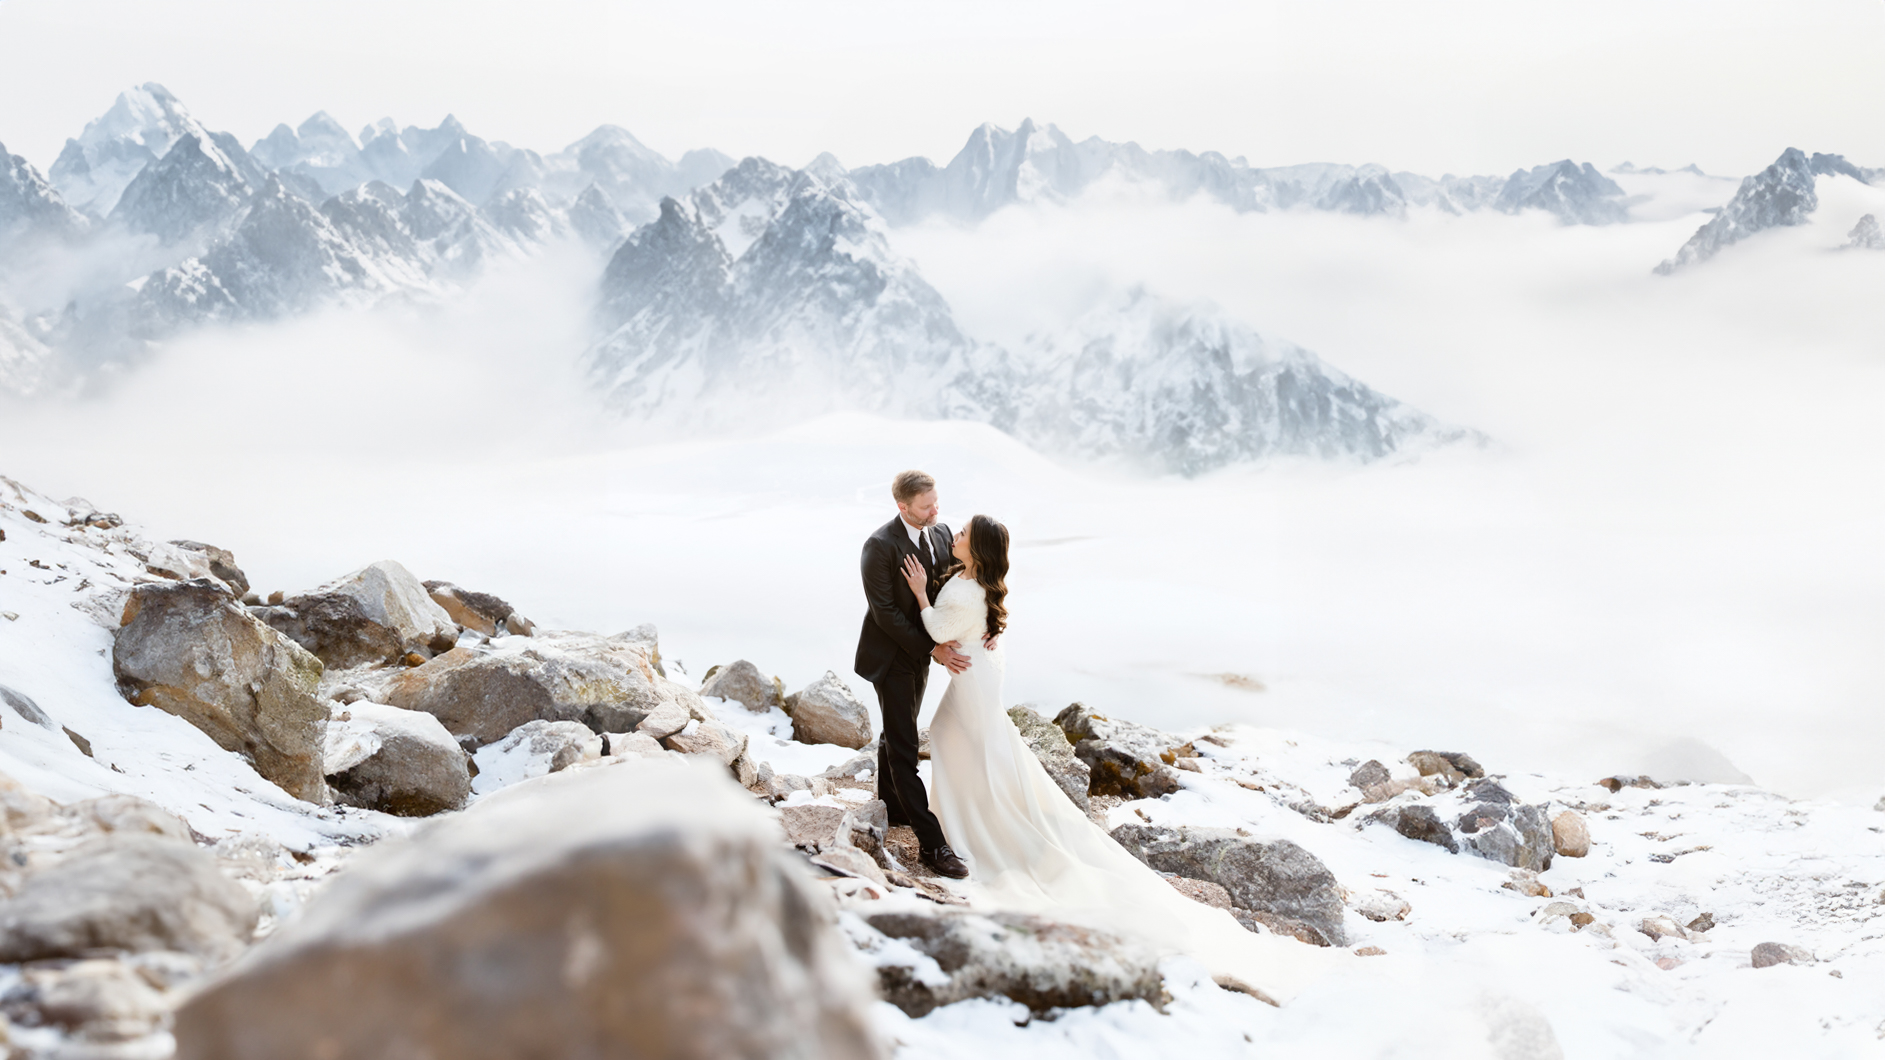 Adventure elopement in the mountains